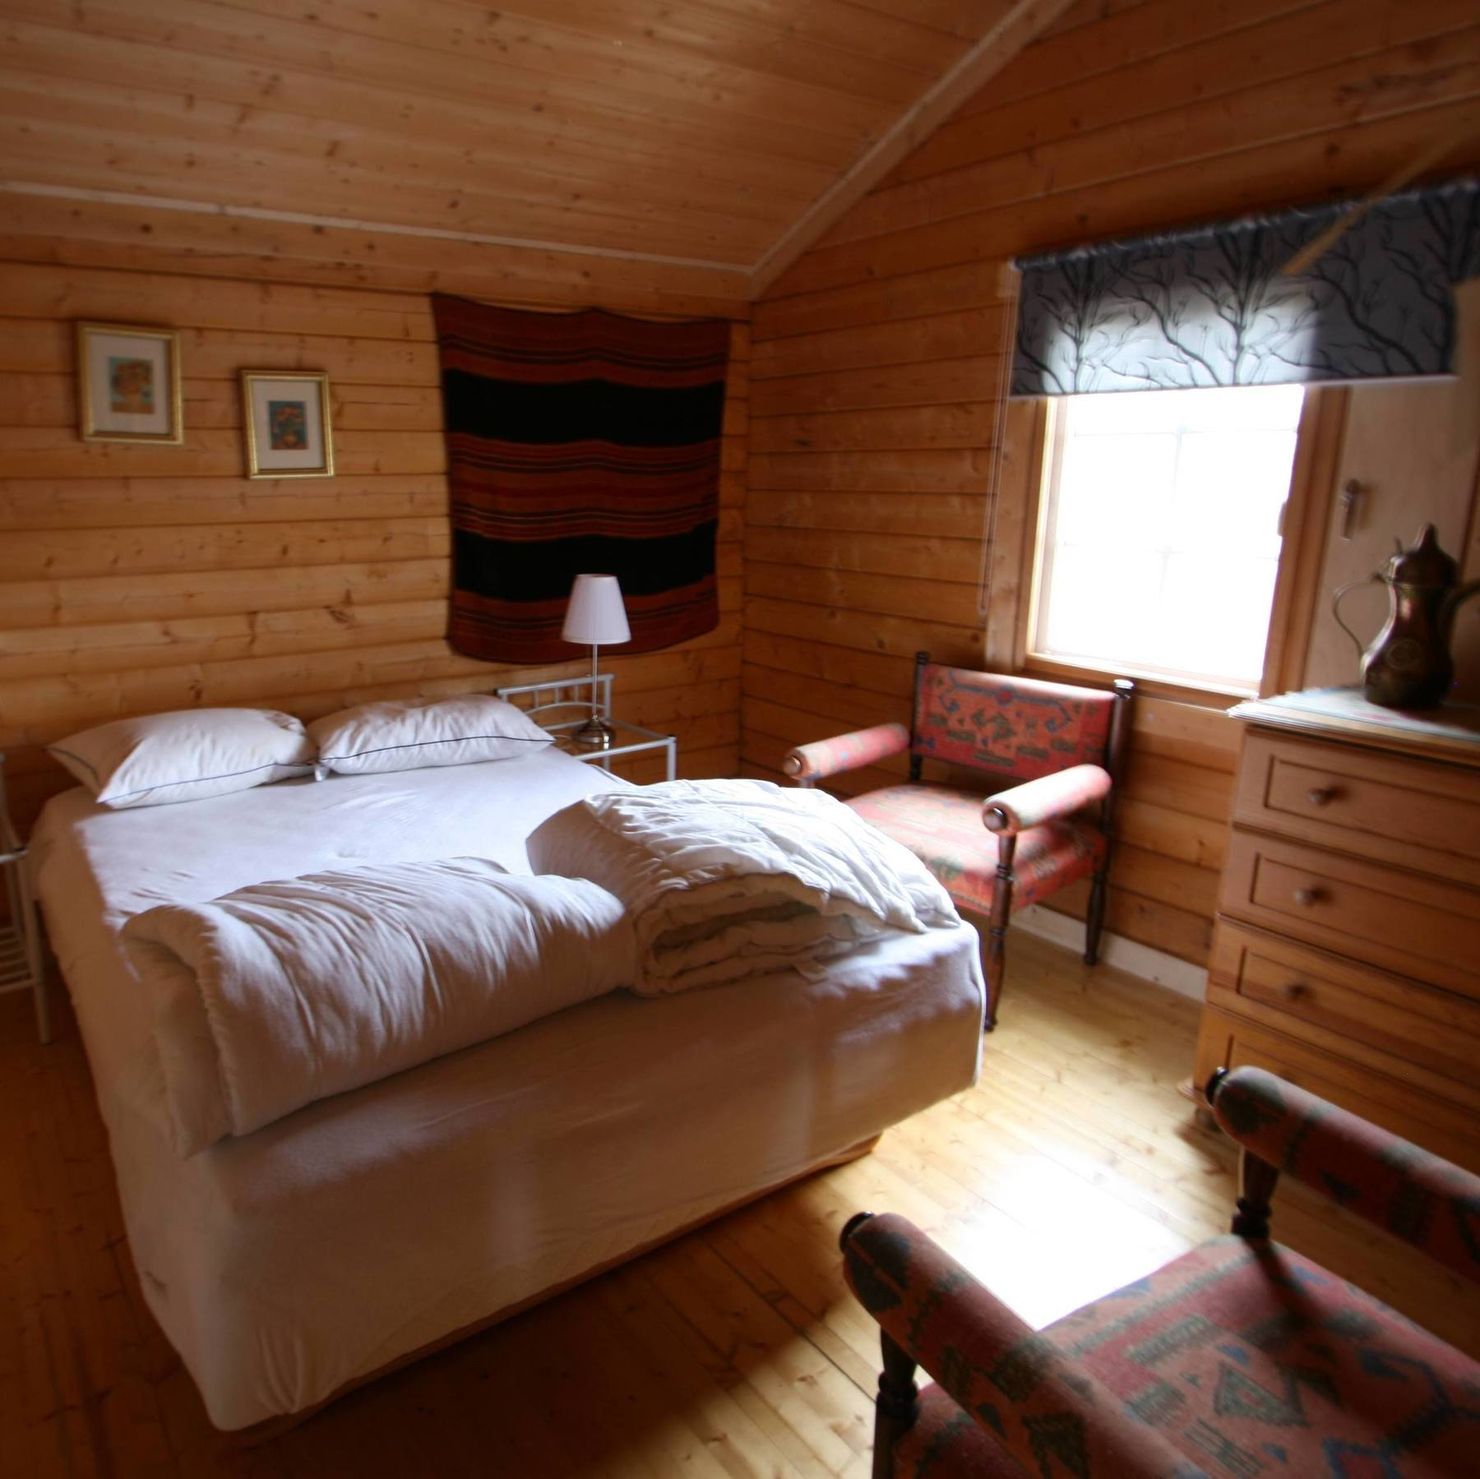 Spacious bedroom with window, double bed, armchair and chest of drawers